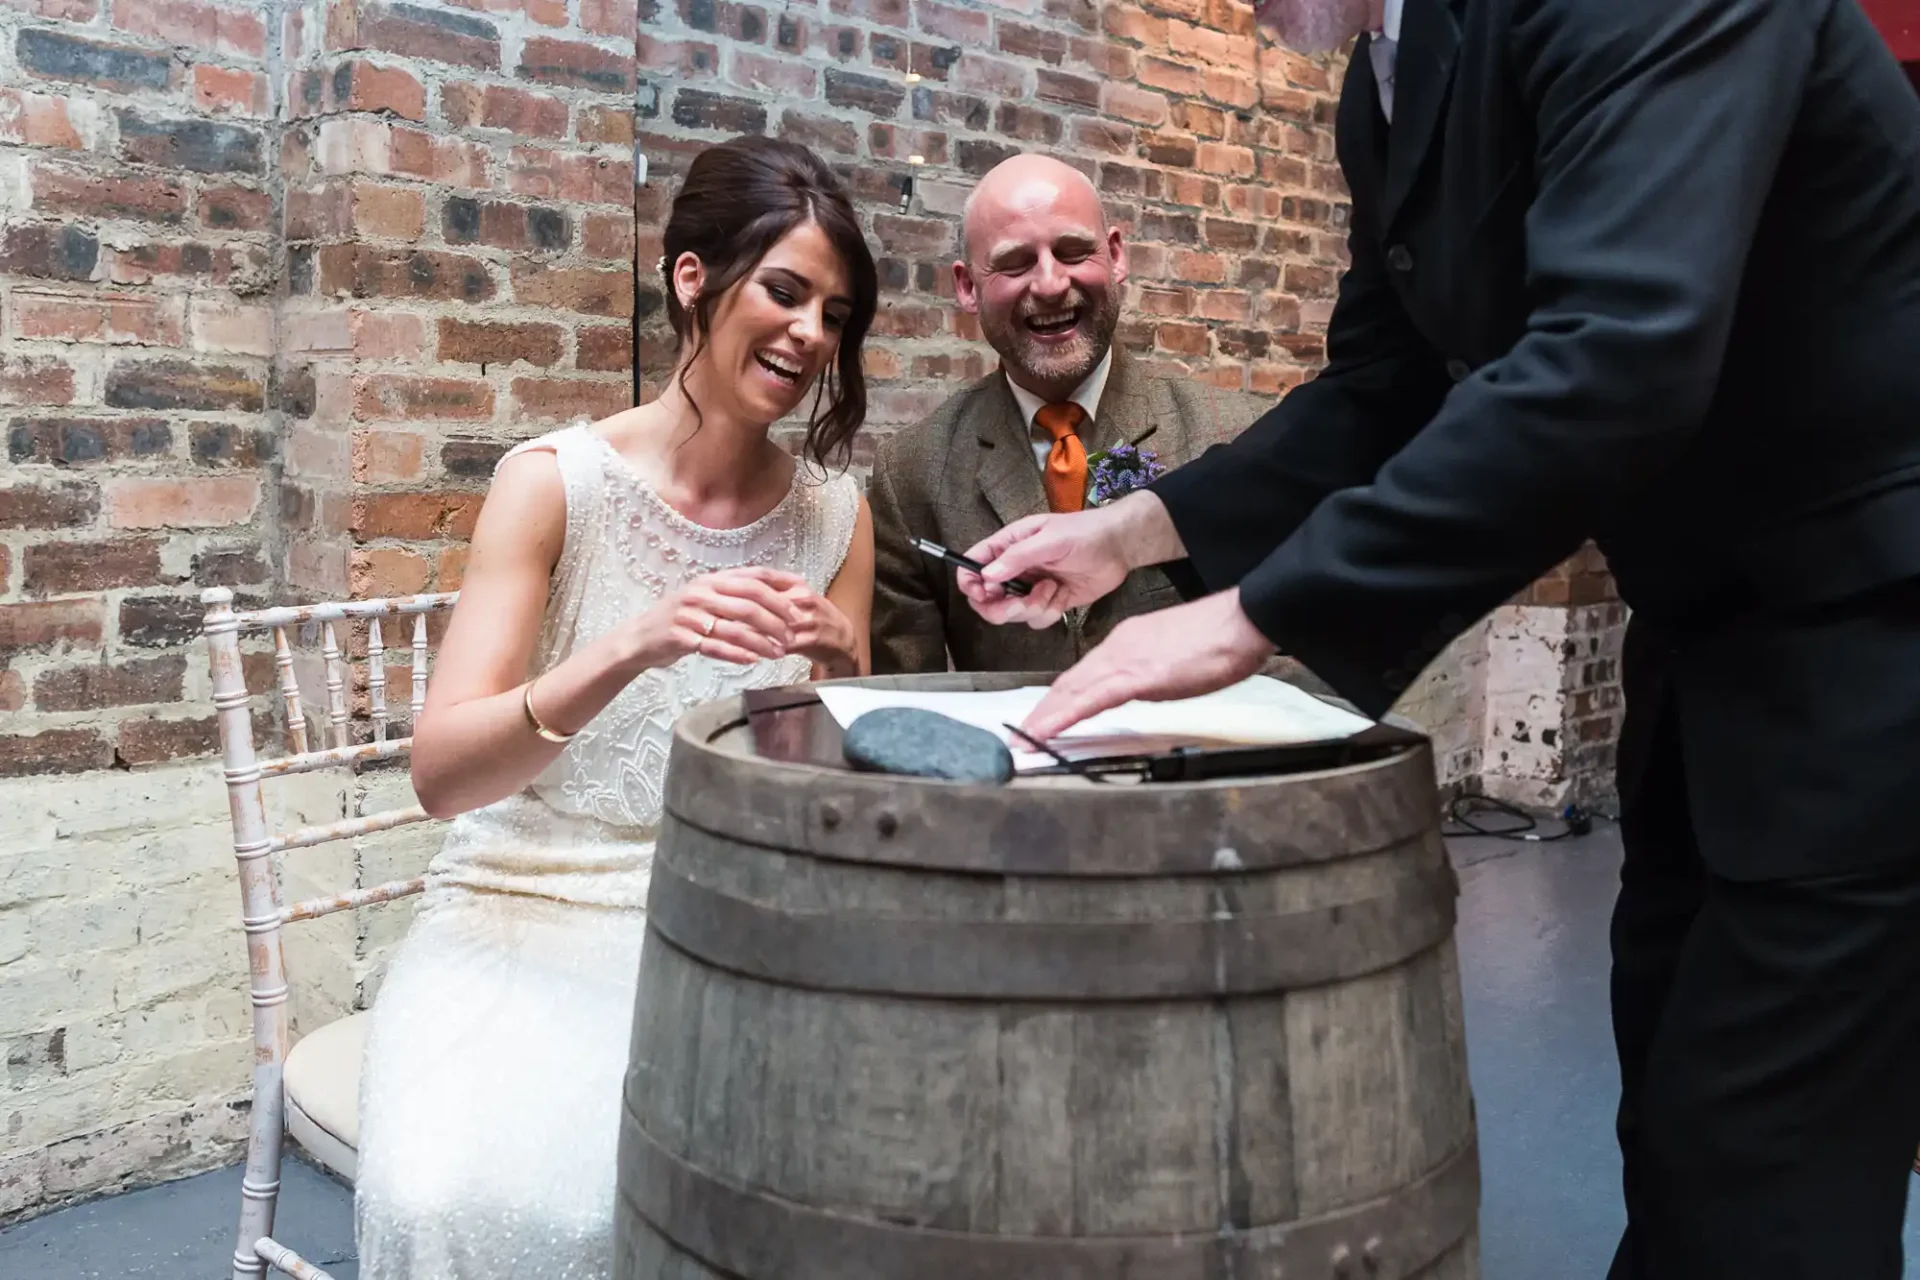 A bride and groom laugh joyfully while sitting and signing a document on a barrel, as an officiant stands beside them.